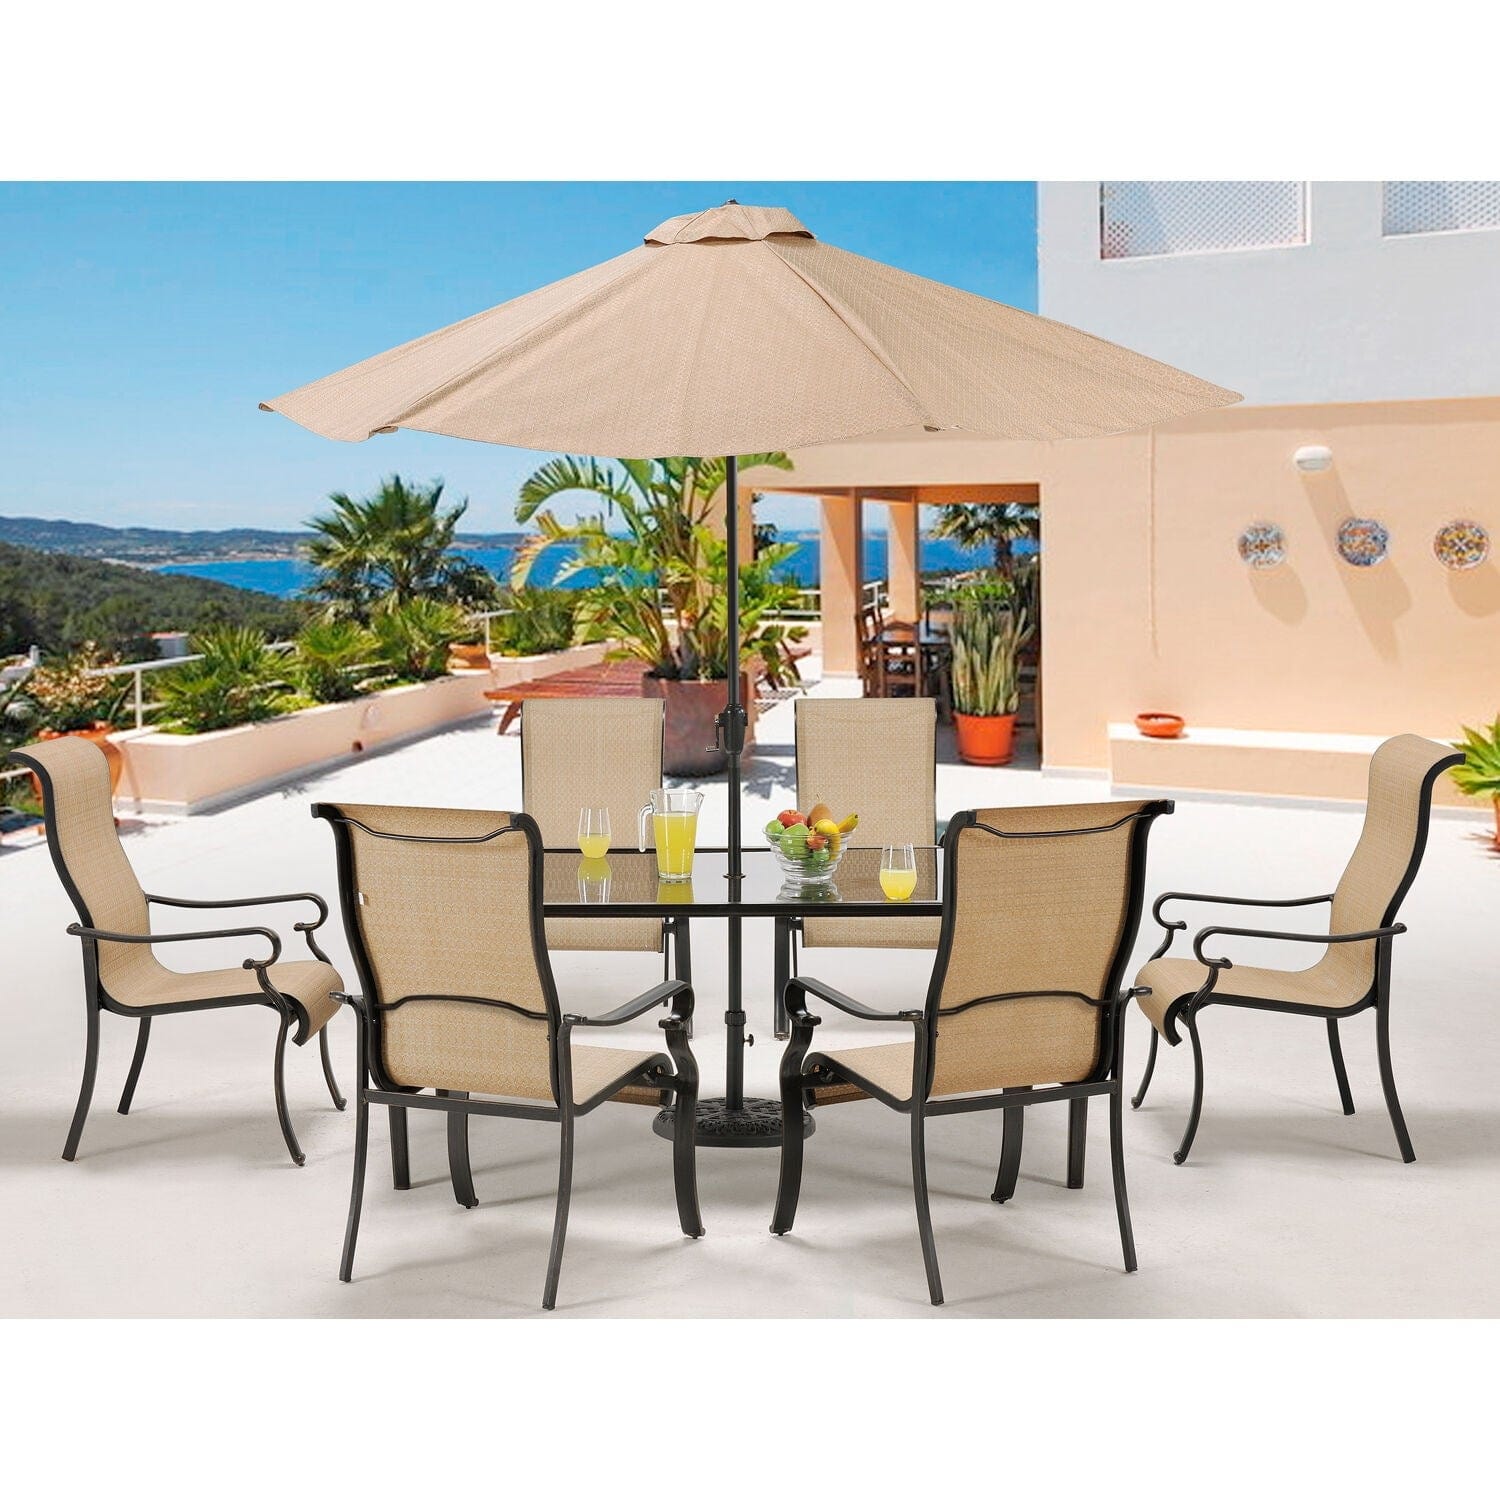 Hanover Outdoor Dining Set Hanover Brigantine 7 Piece Outdoor Dining Set with Glass-Top Table and 9 Ft. Umbrella | Tan/Cast Aluminum | BRIGDN7PC-GLS-SU